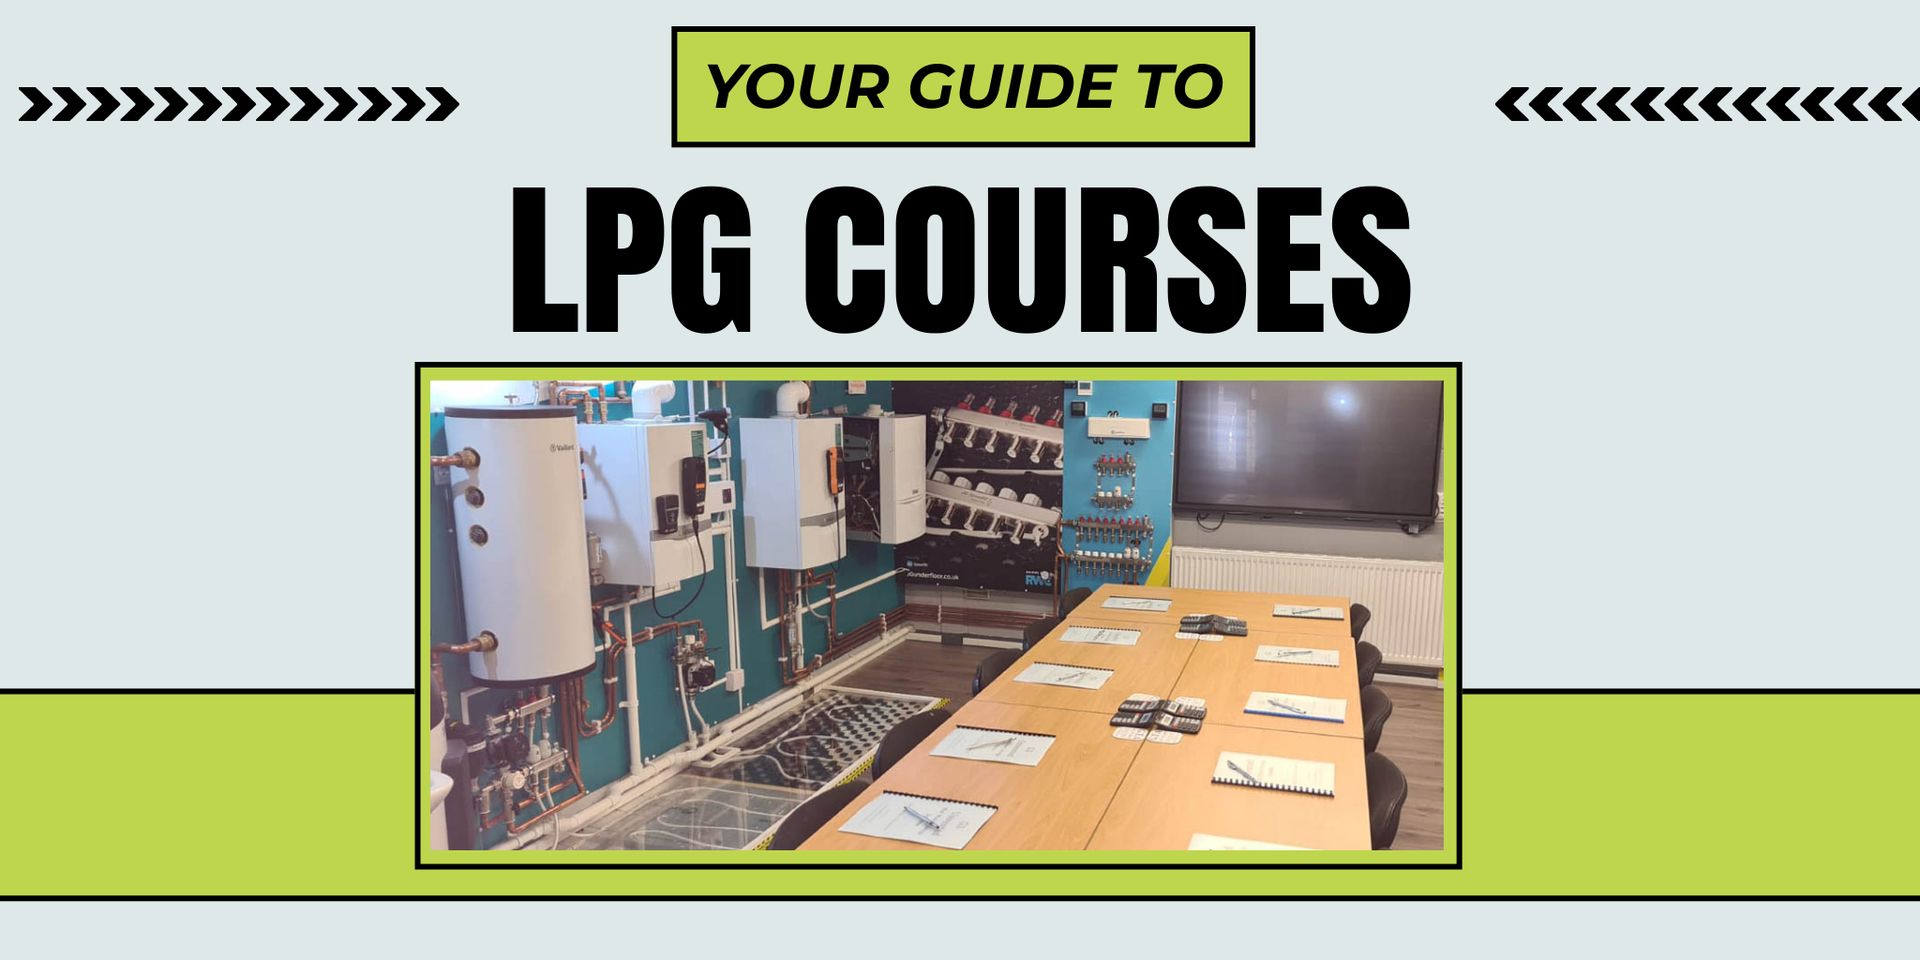 Mastering LPG: Your Guide to Gas Training & Assessment's LPG Courses